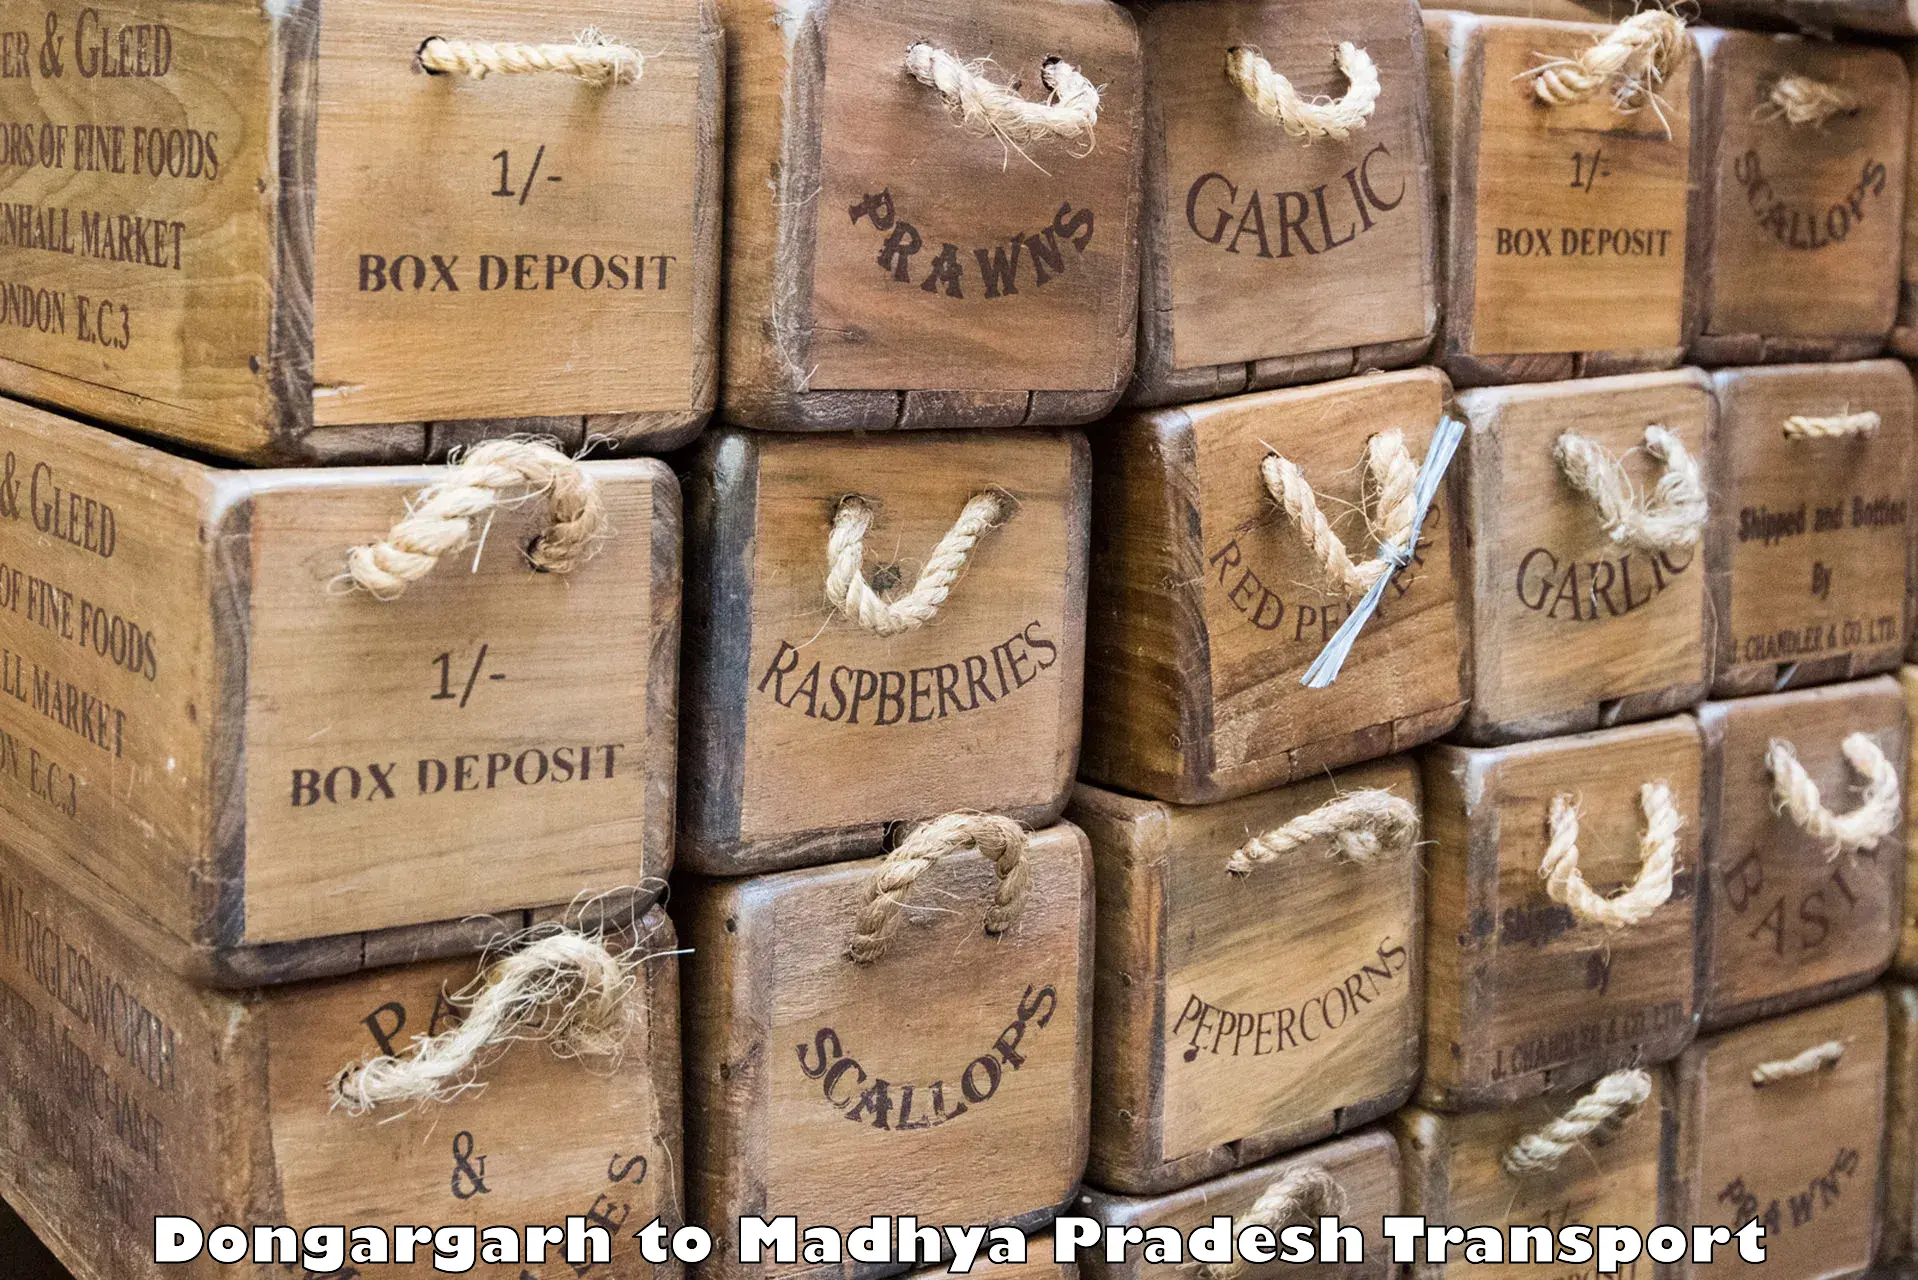 Container transport service Dongargarh to Narsinghgarh